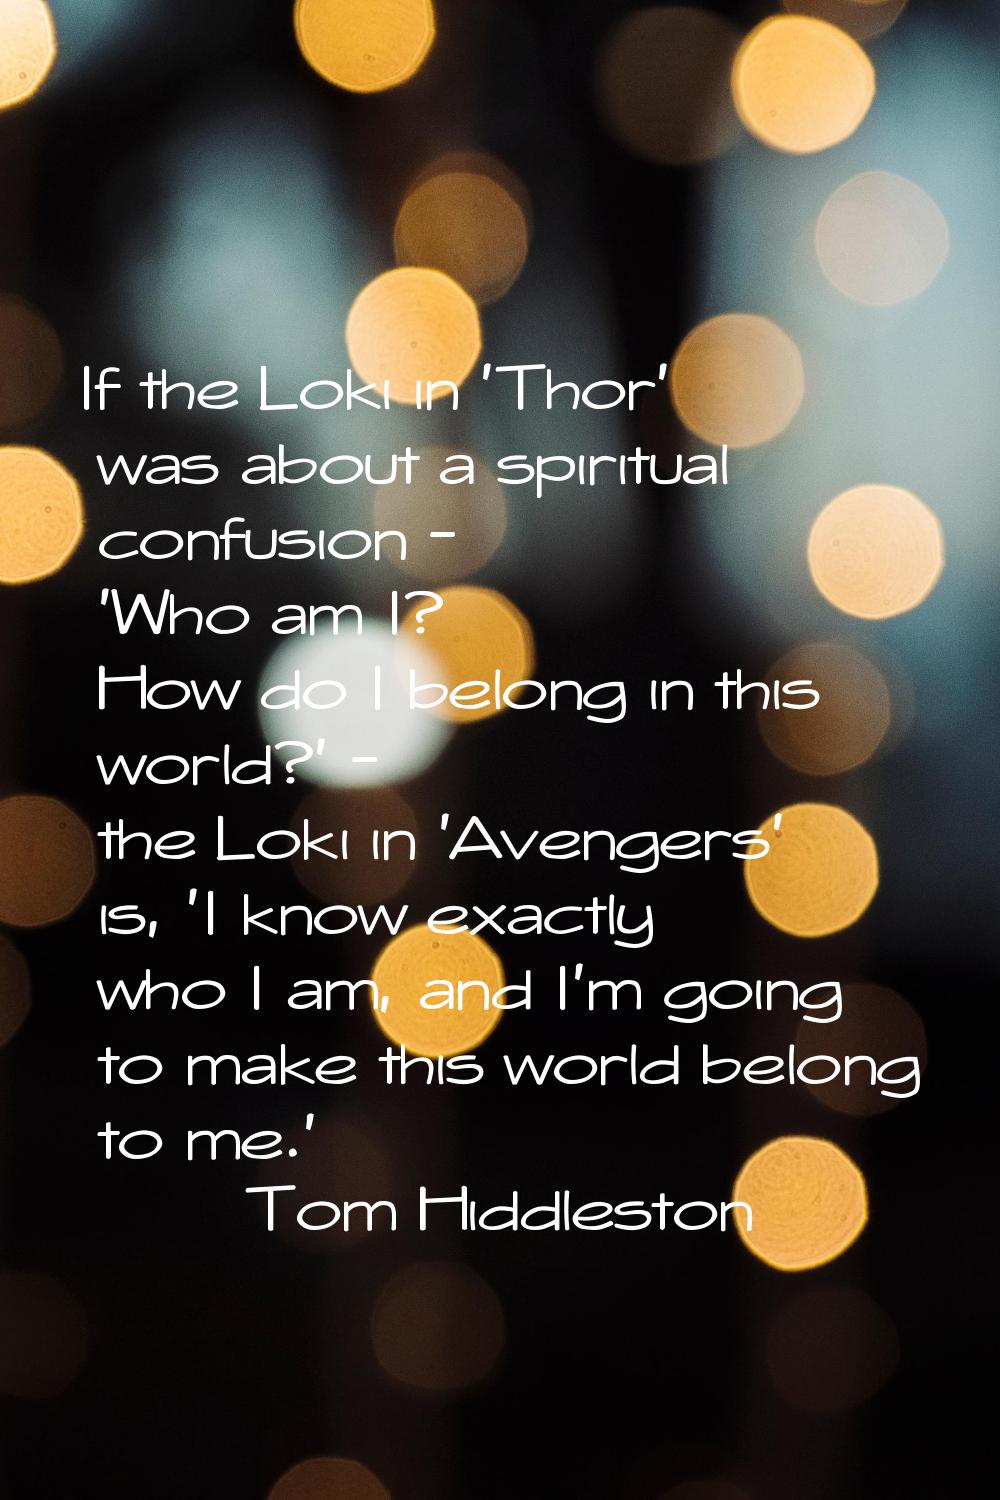 If the Loki in 'Thor' was about a spiritual confusion - 'Who am I? How do I belong in this world?' 